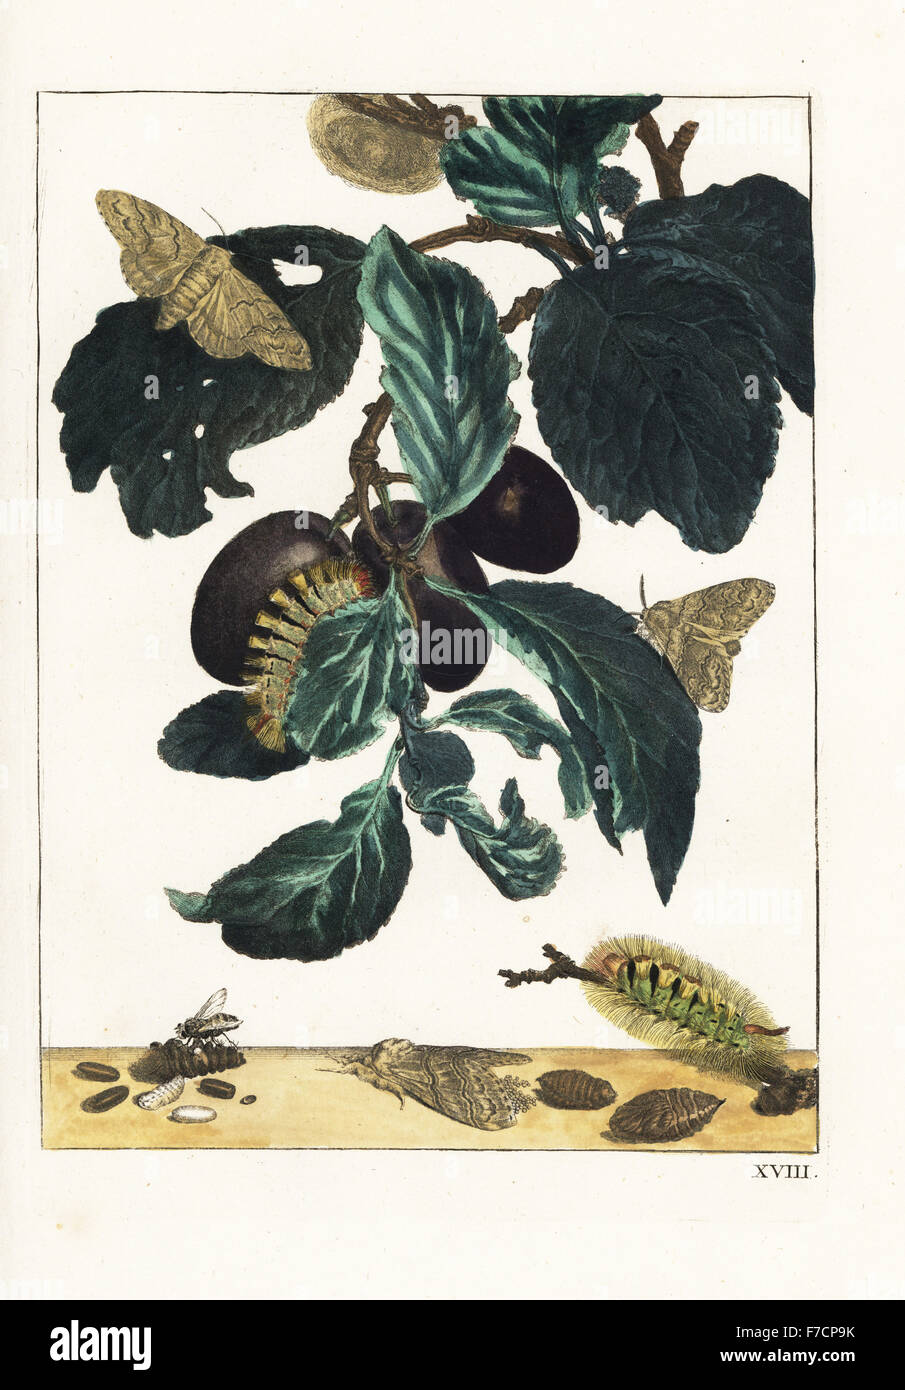 Yellow or pale tussock moth, Calliteara pudibunda, on a plum branch, Prunus domestica. Handcoloured copperplate engraving drawn and etched by Jacob l'Admiral in Naauwkeurige Waarneemingen omtrent de veranderingen van veele Insekten (Accurate Descriptions of the Metamorphoses of Insects), J. Sluyter, Amsterdam, 1774. For this second edition, M. Houttuyn added another eight plates to the original 25. Stock Photo